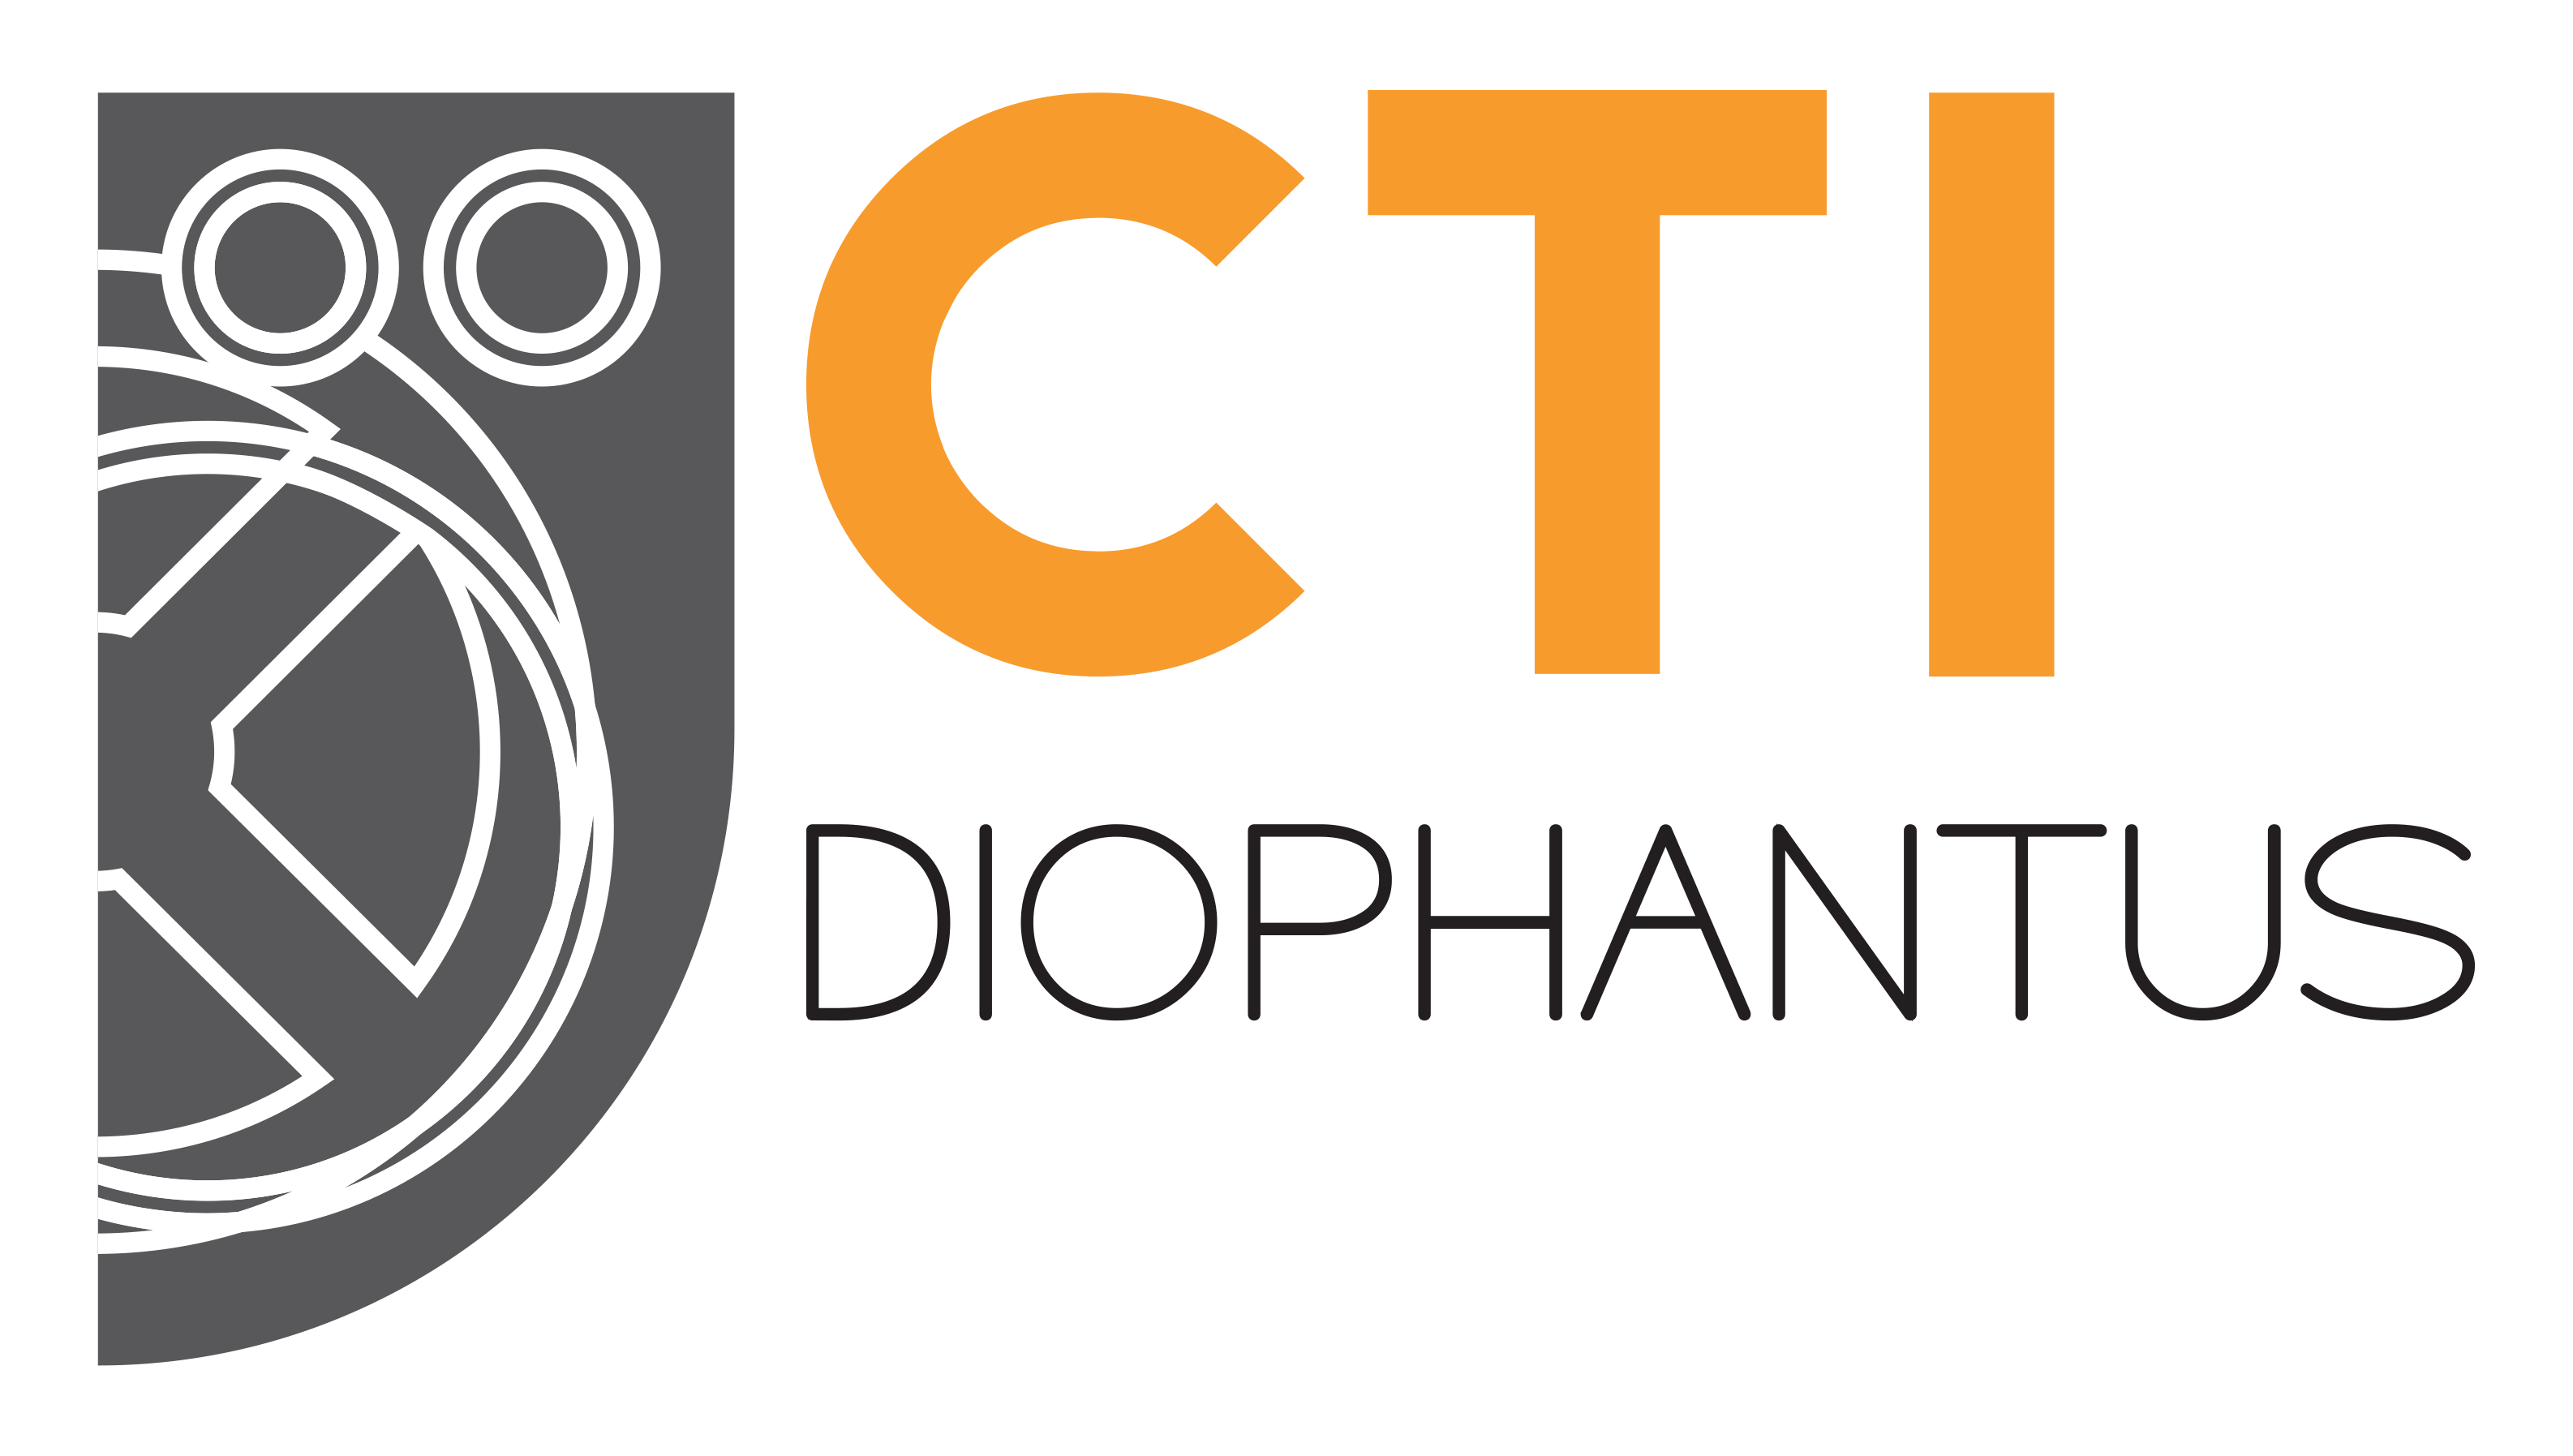 Computer Technology Institute and Press 'Diophantus' logo